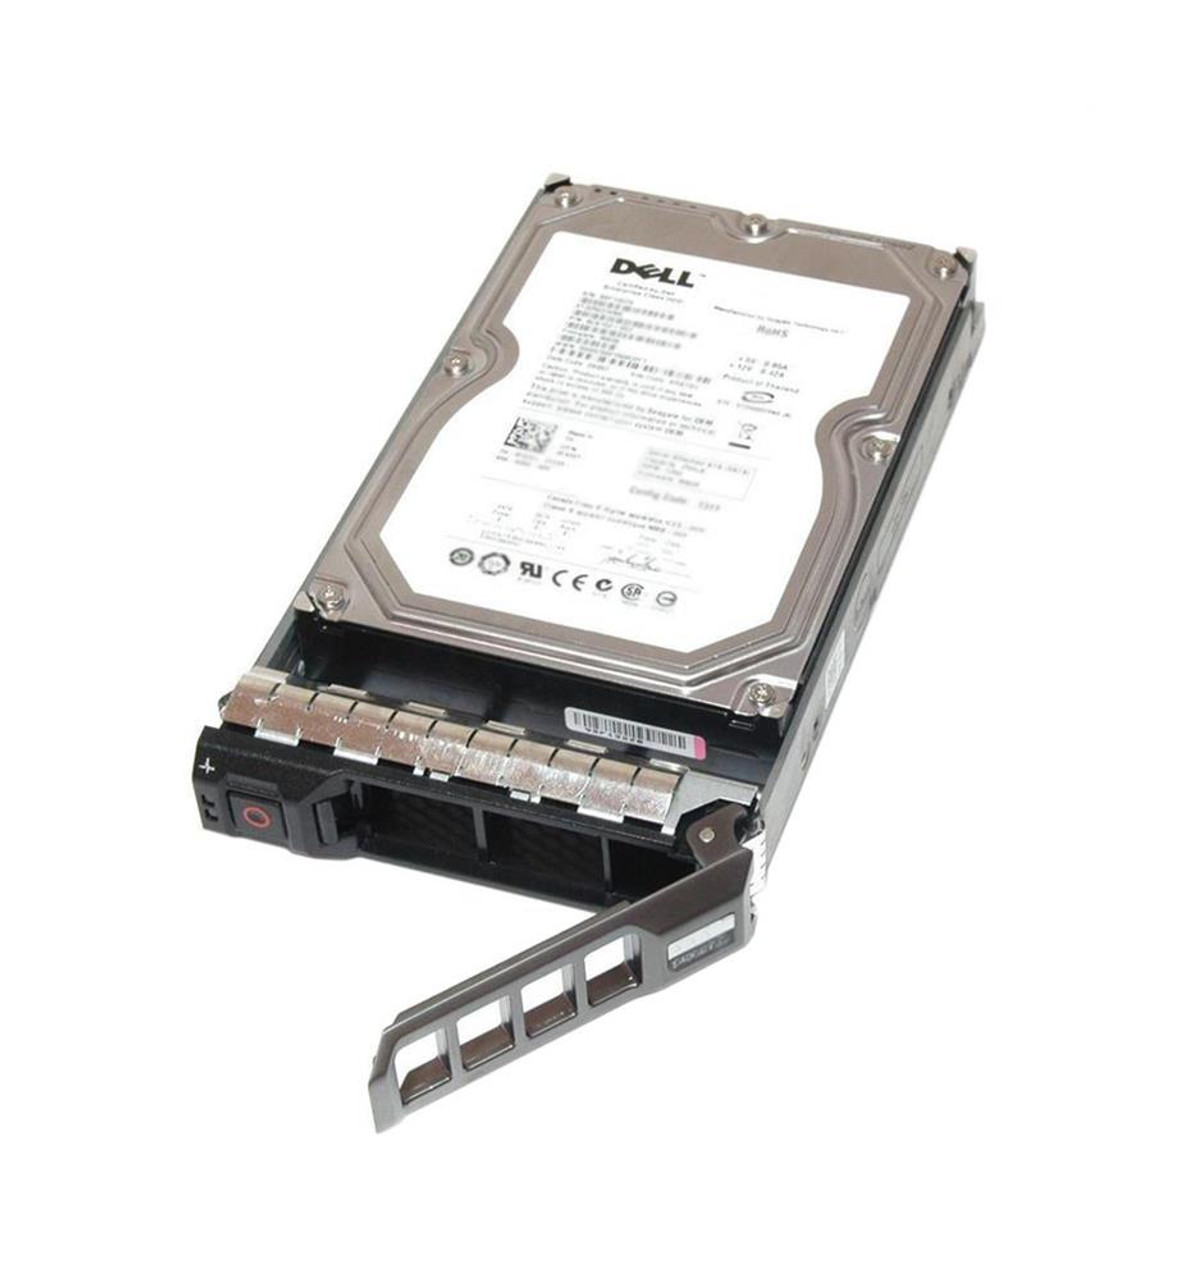 637YJ Dell 8TB 7200RPM SAS 12Gbps Nearline Hot Swap (512e) 3.5-inch Internal Hard Drive with Tray